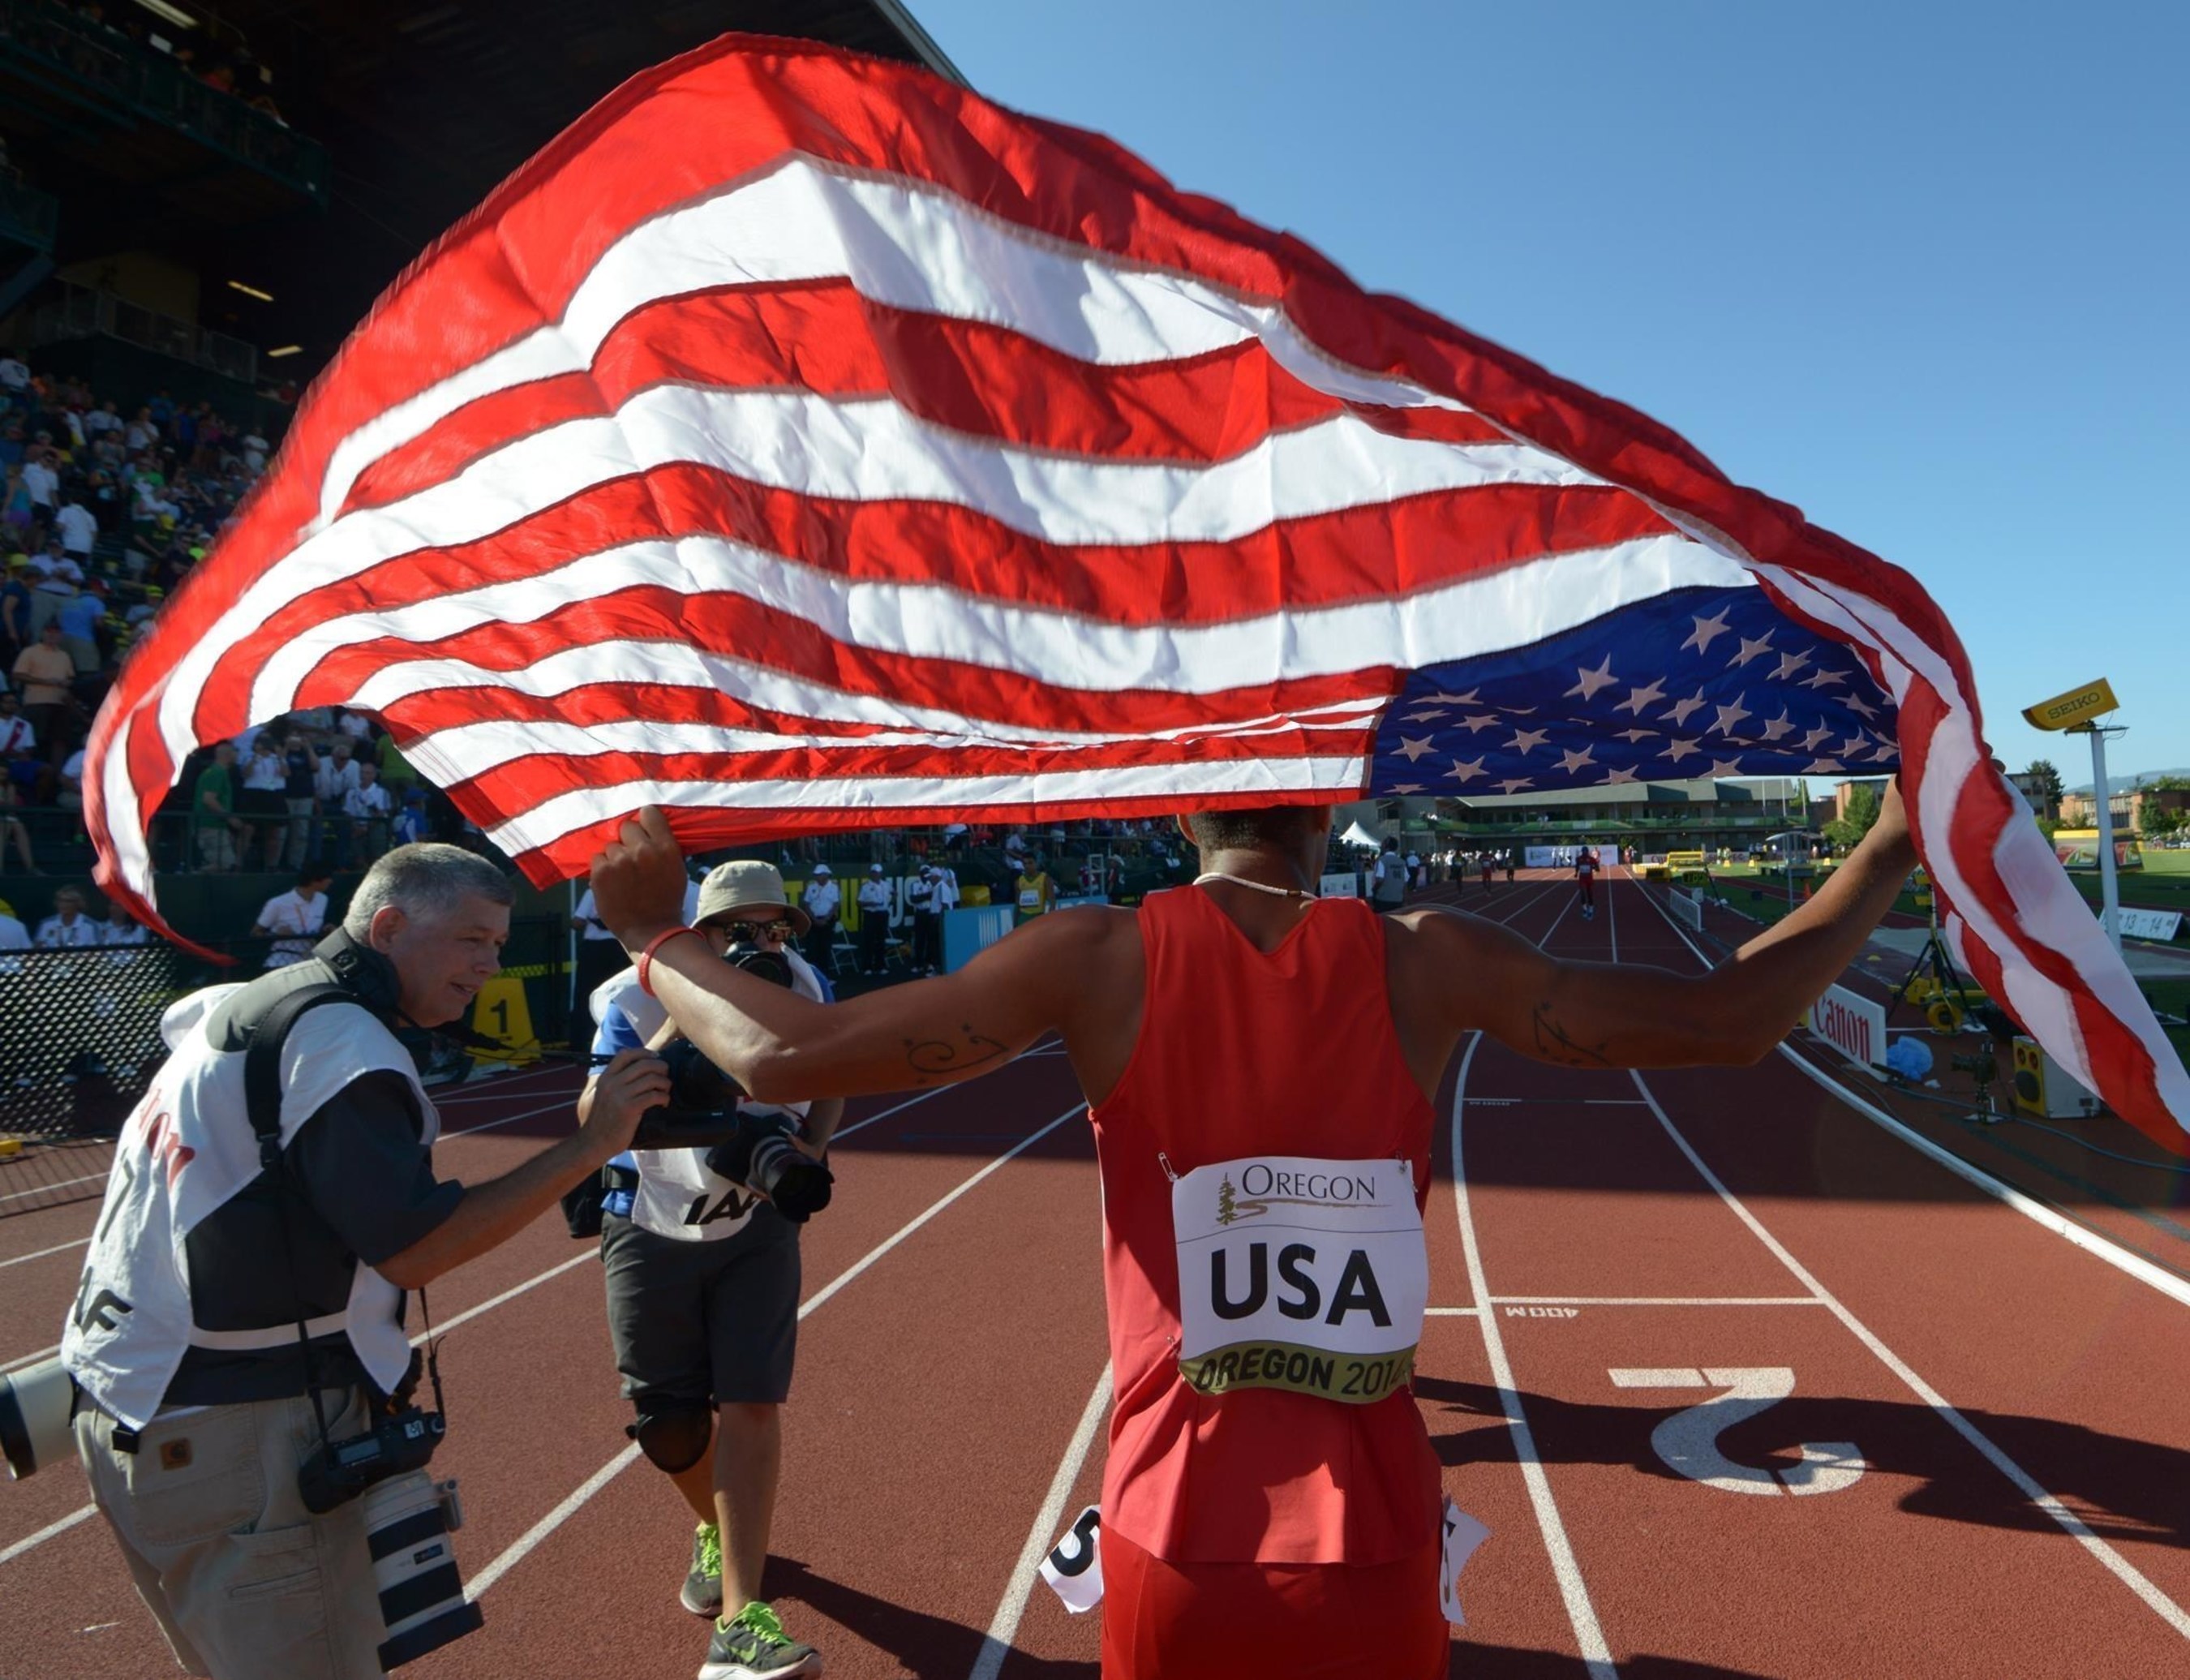 The IAAF's crown jewel of track and field, the World Championships, will be held in the United States for the first time in 2021. USA Track & Field, the City of Eugene and local organizing committee TrackTown USA will host the meet at the University of Oregon's historic Hayward Field. The 2021 World Championships will be the third IAAF championship event to be held in Oregon in the span of seven years.